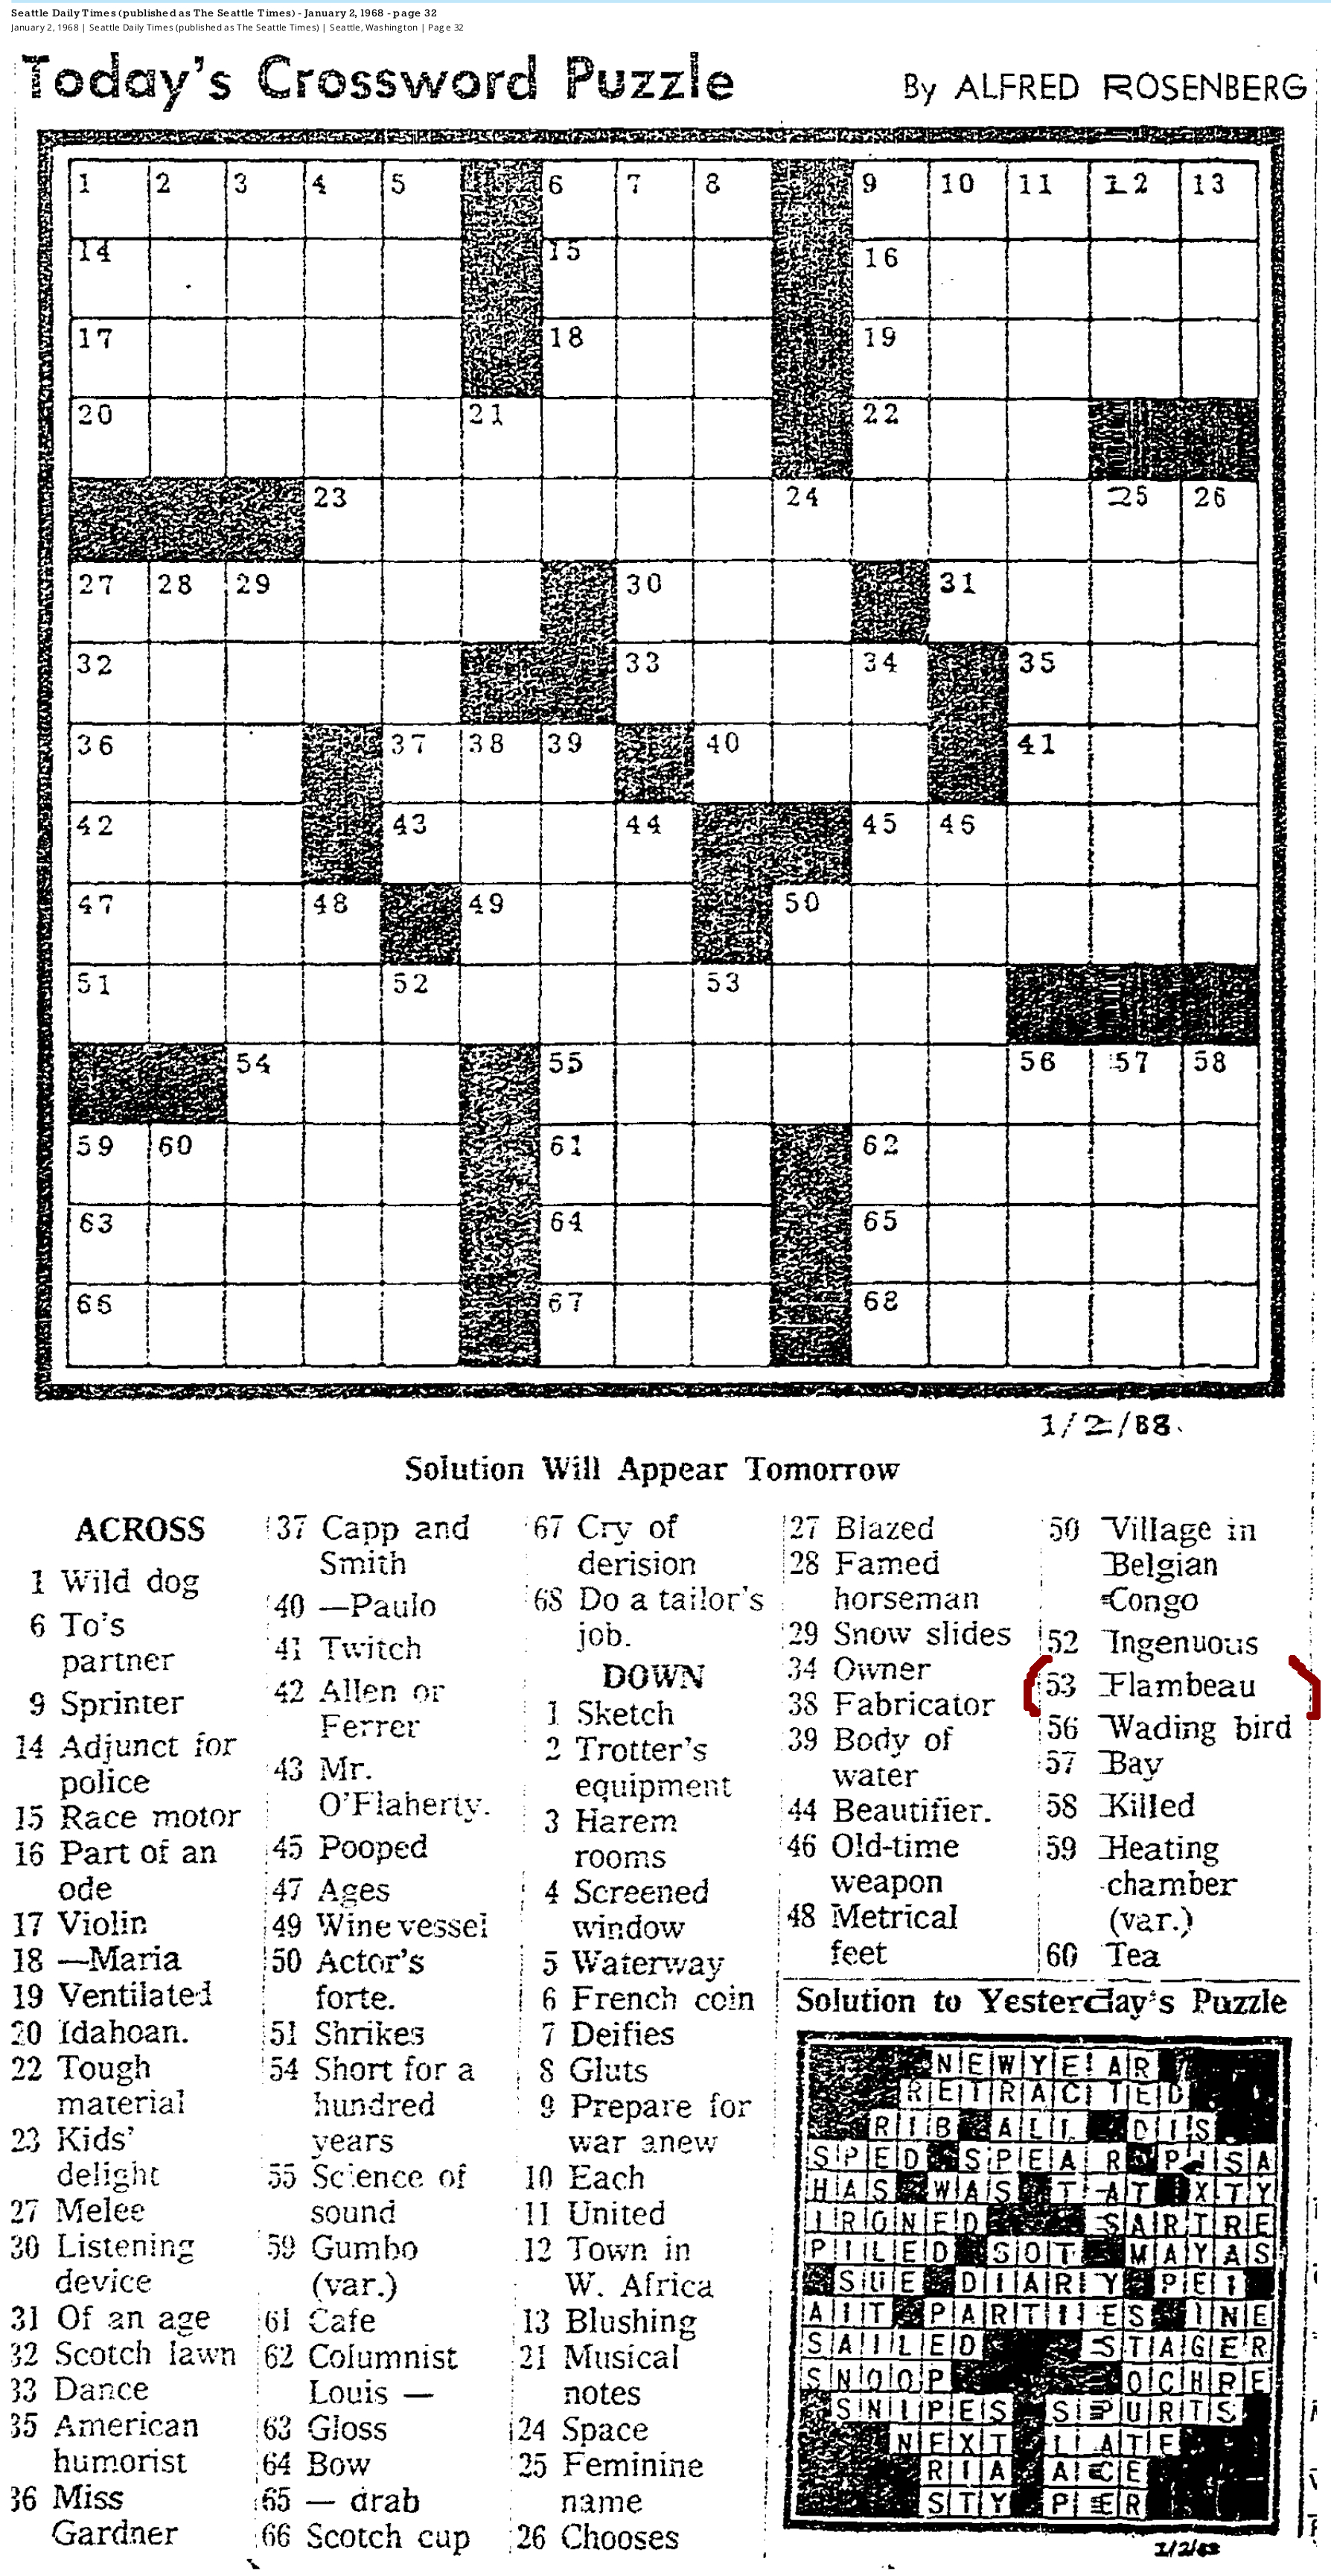 seattle times daily crossword puzzle